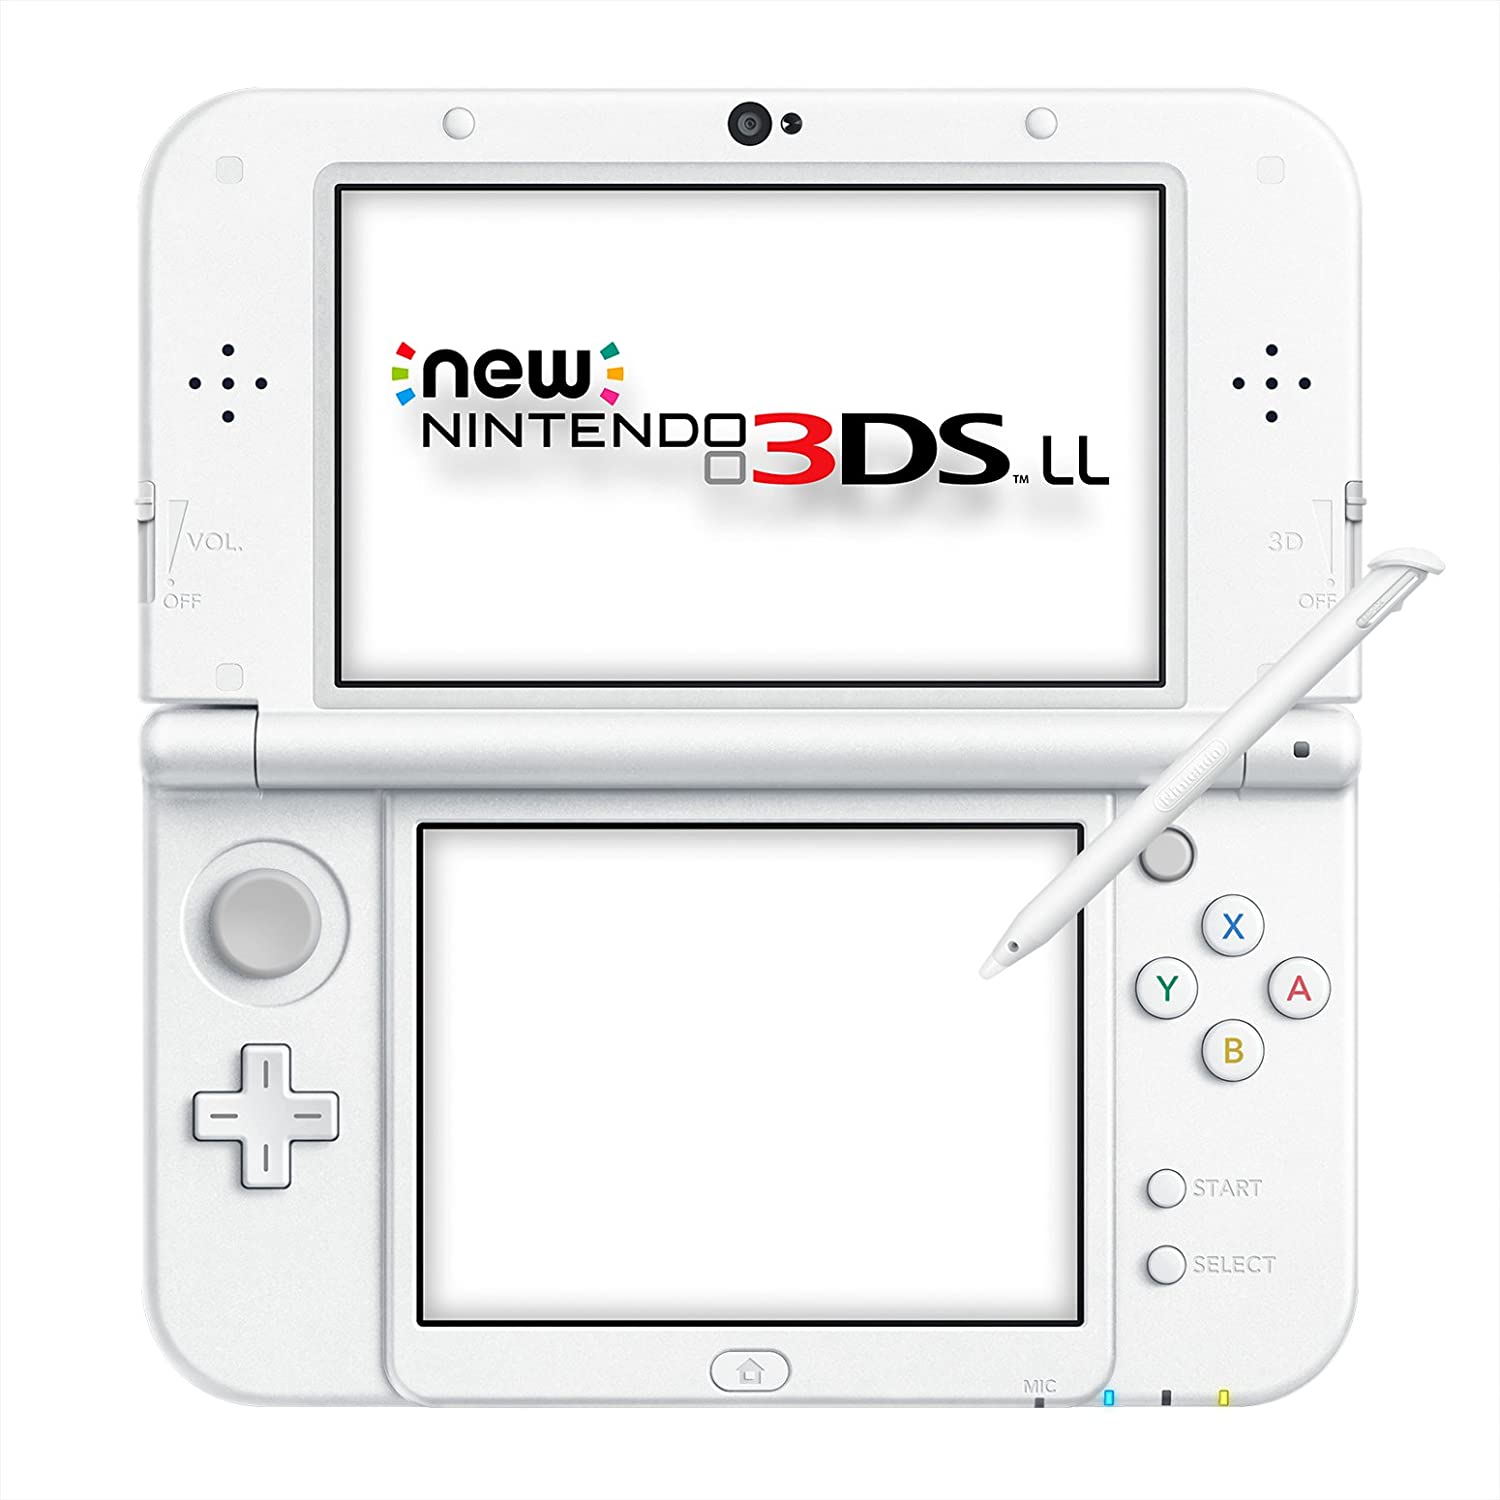 Nintendo New 3DS XL incl. game white | Super Mario 3D Land (DE Version) | €309 | Now with a 30-Day Trial Period